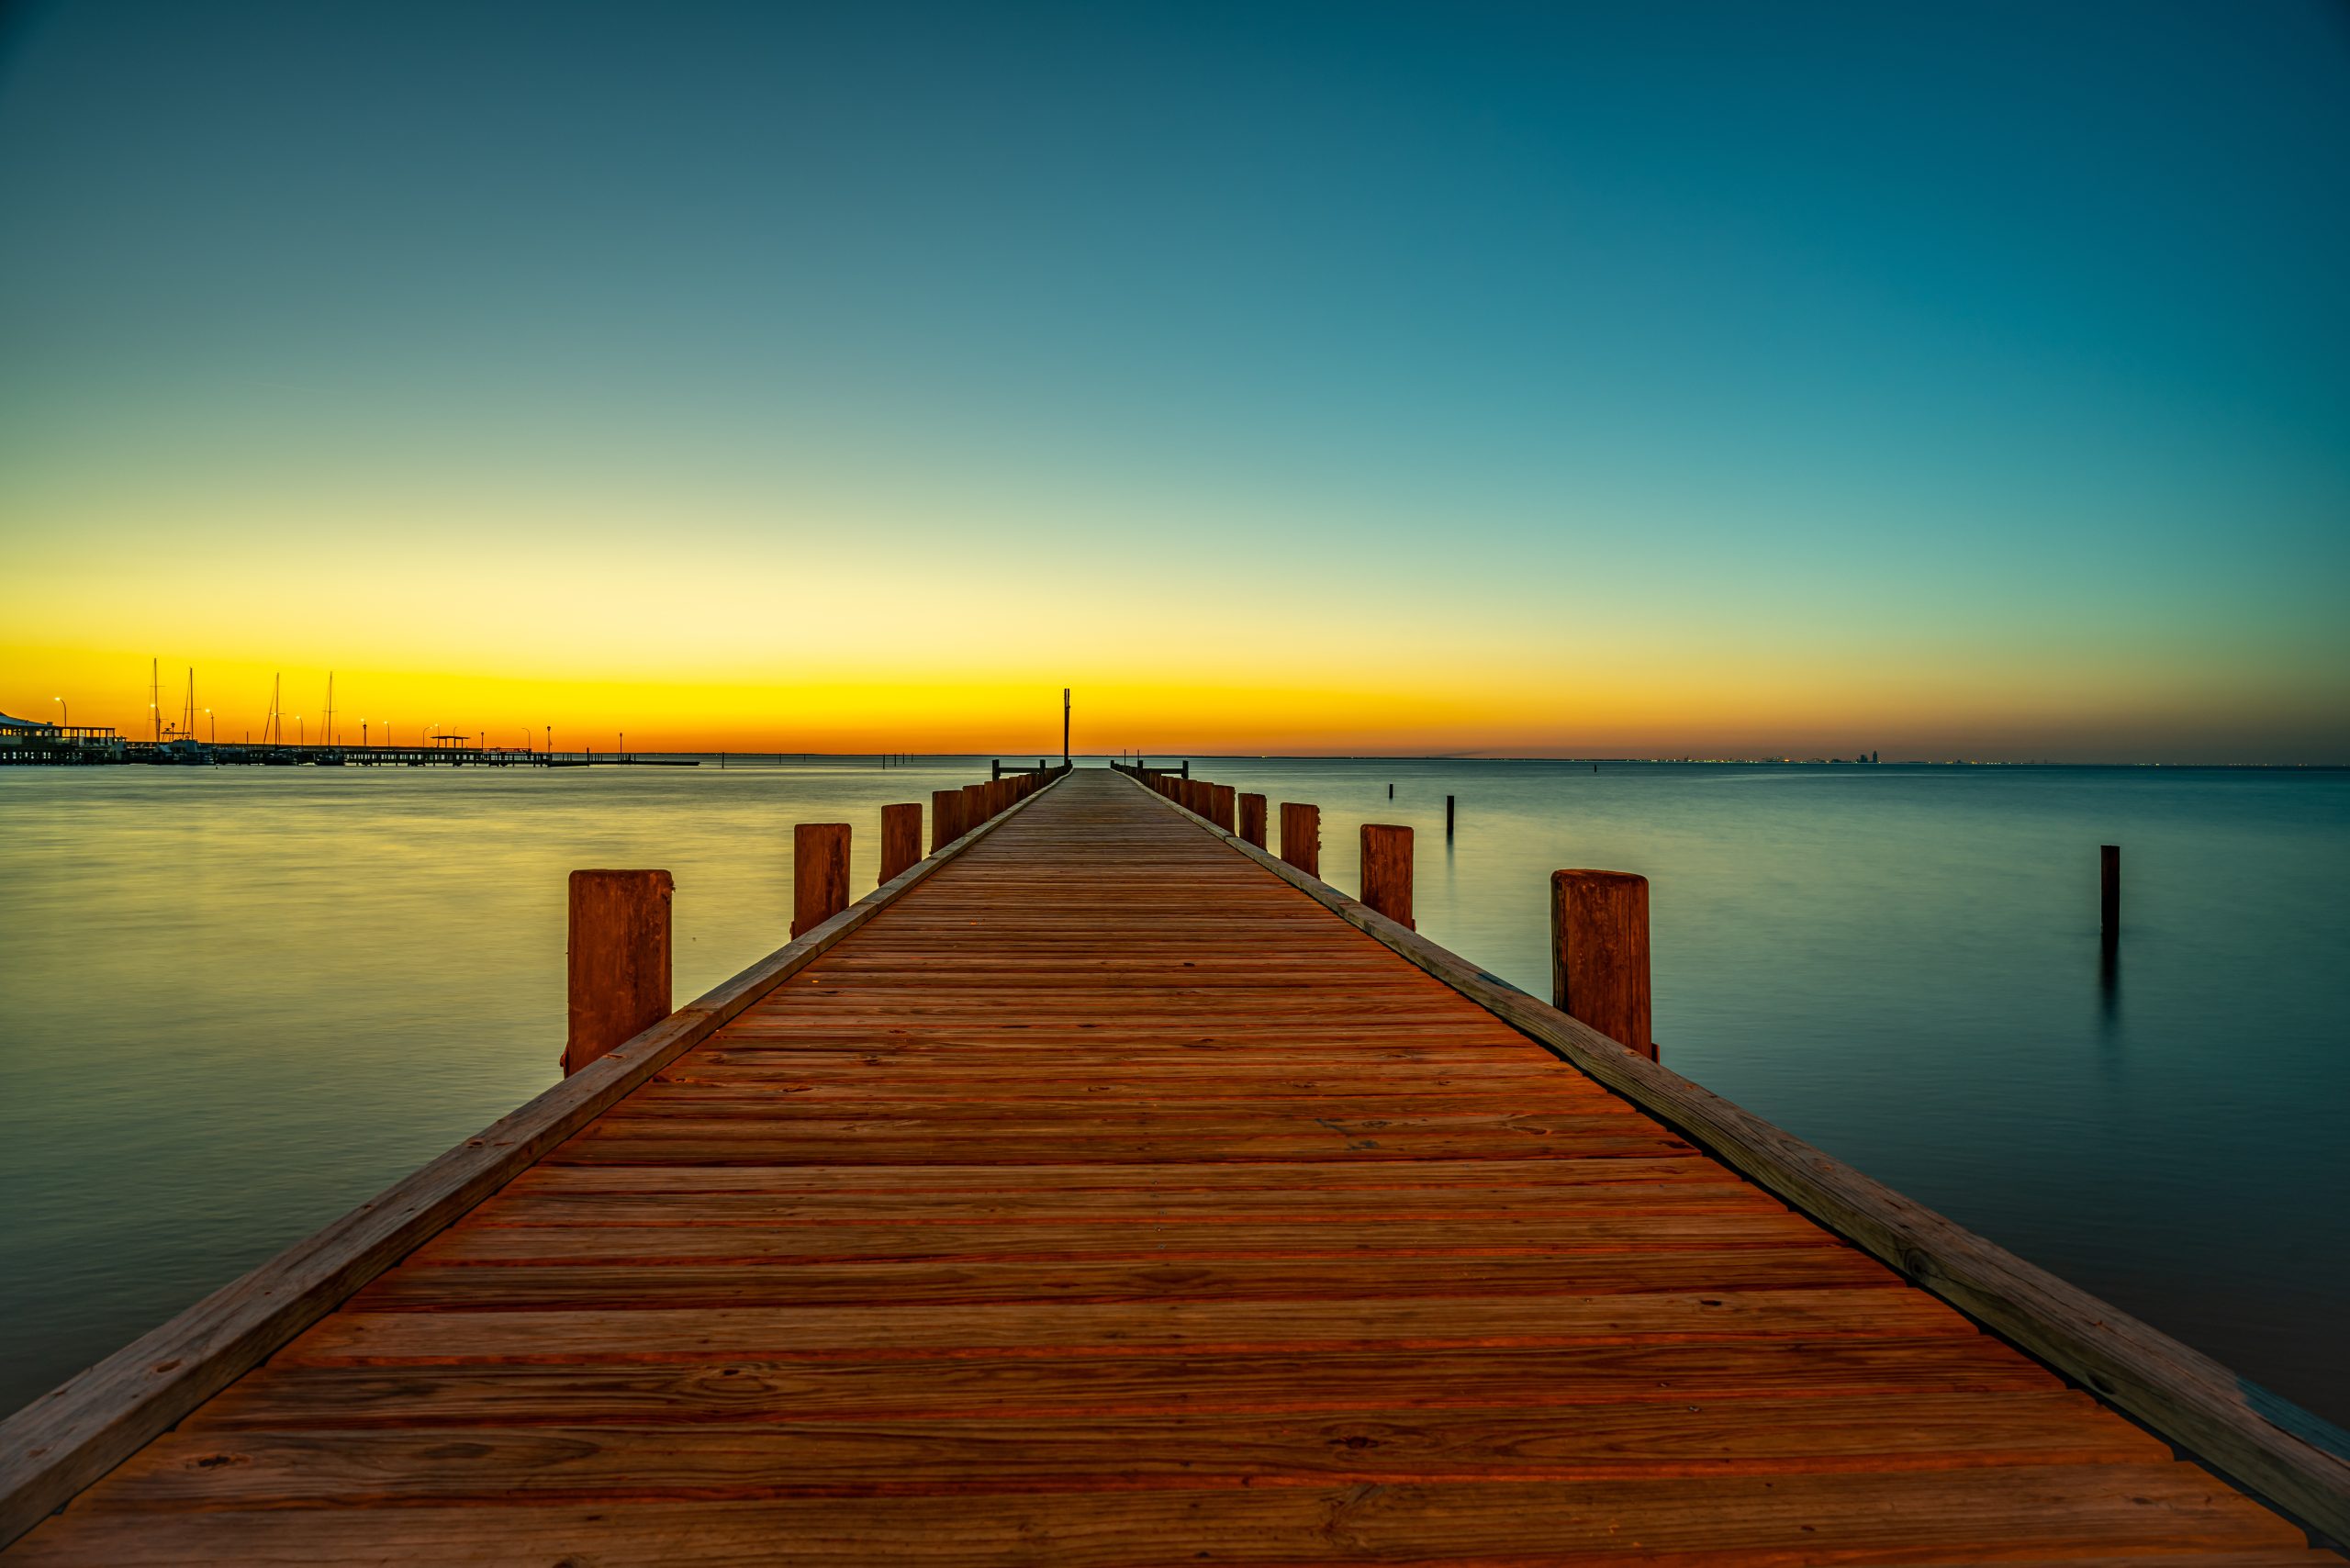 A pier at sunset leading out to a body of water.